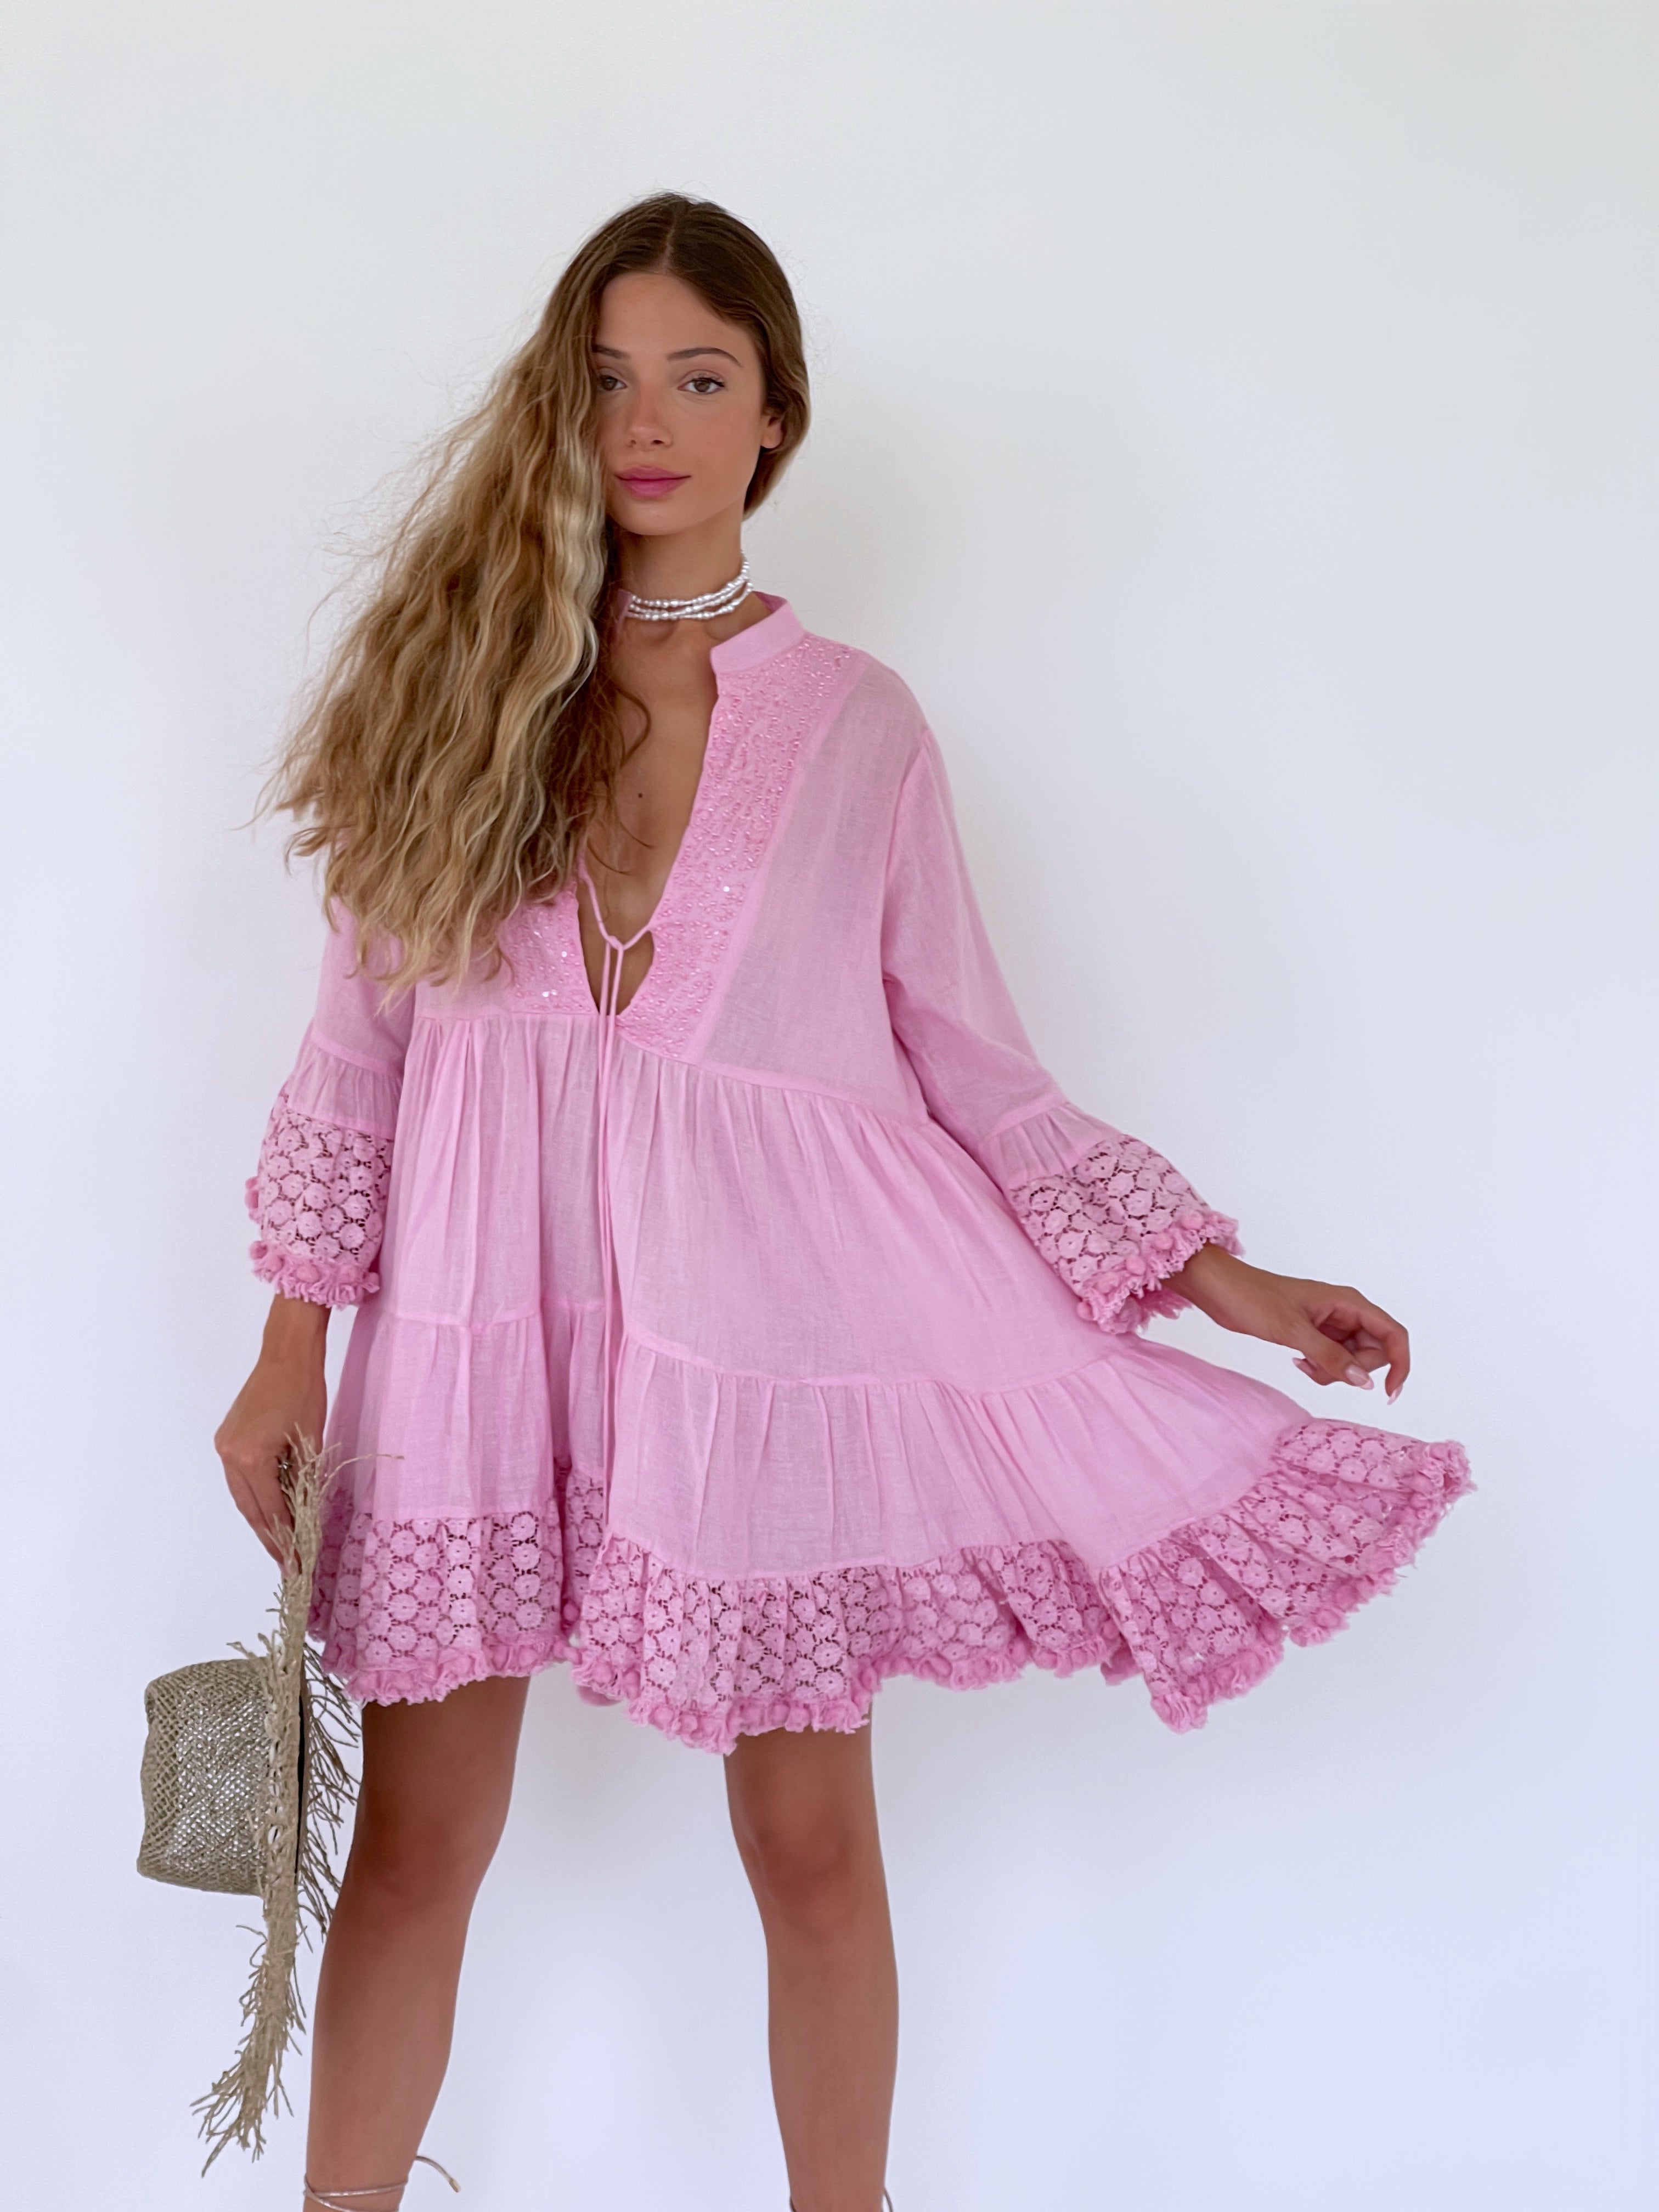 PINK DRESS WITH LACE AND BEADS DETAILS